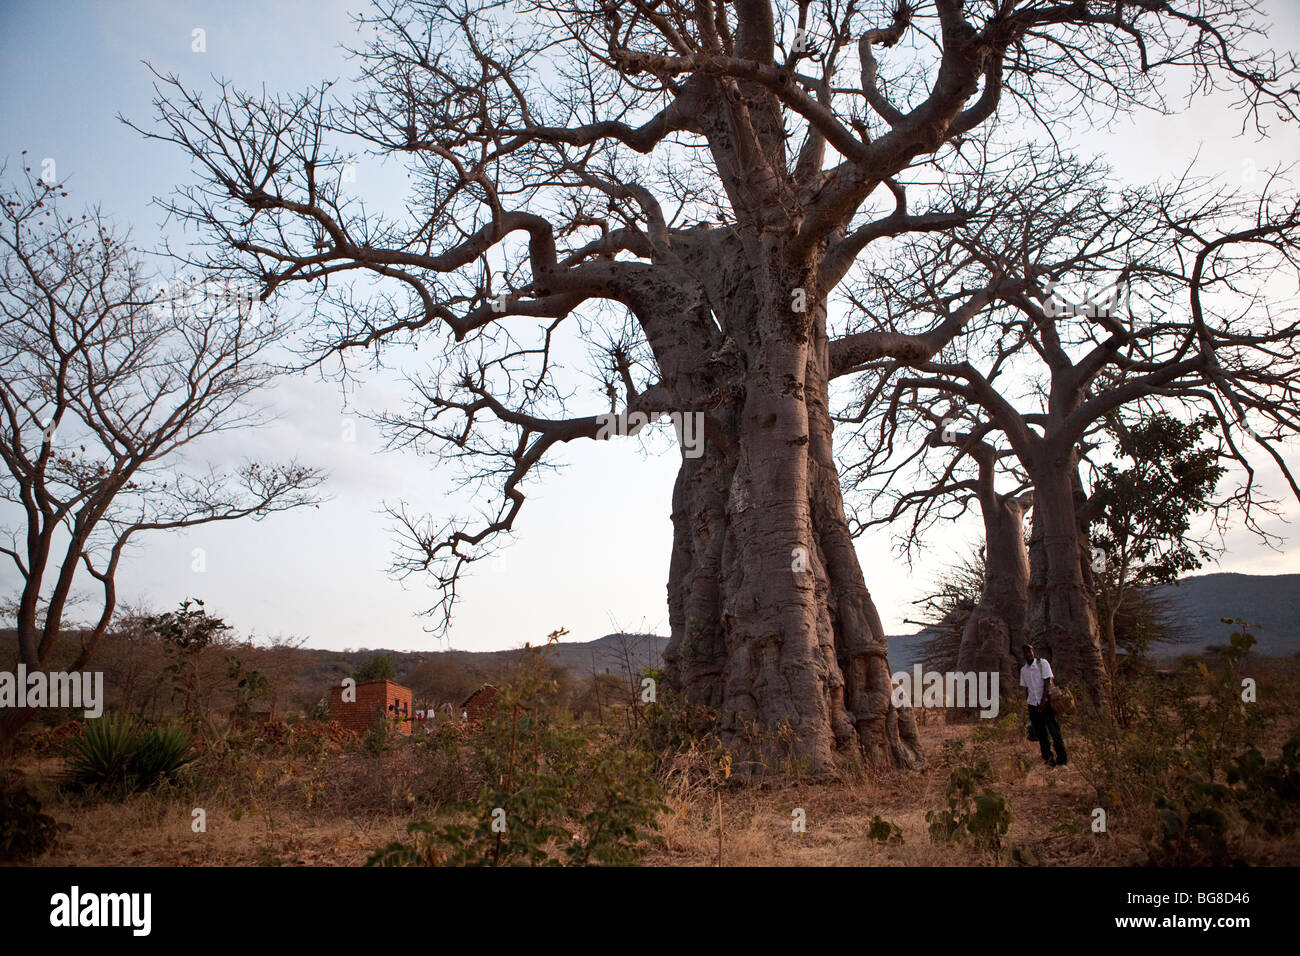 Baobab trees tower above a bystander in the village of Pahi, Dodoma Region, Tanzania. Stock Photo